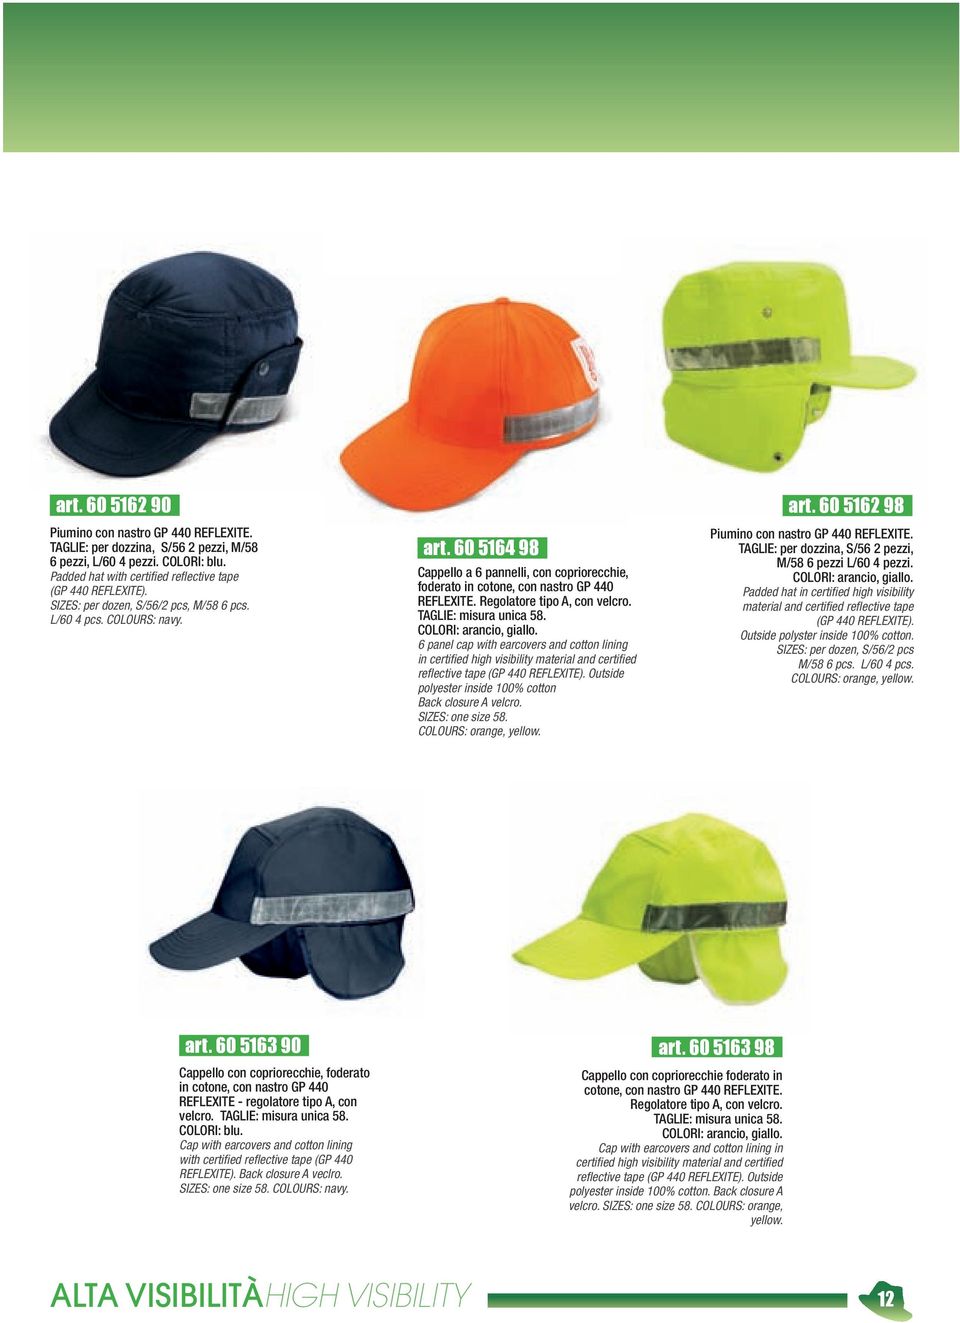 6 panel cap with earcovers and cotton lining in certified high visibility material and certified reflective tape (GP 440 REFLEXITE). Outside polyester inside 100% cotton Back closure A velcro.